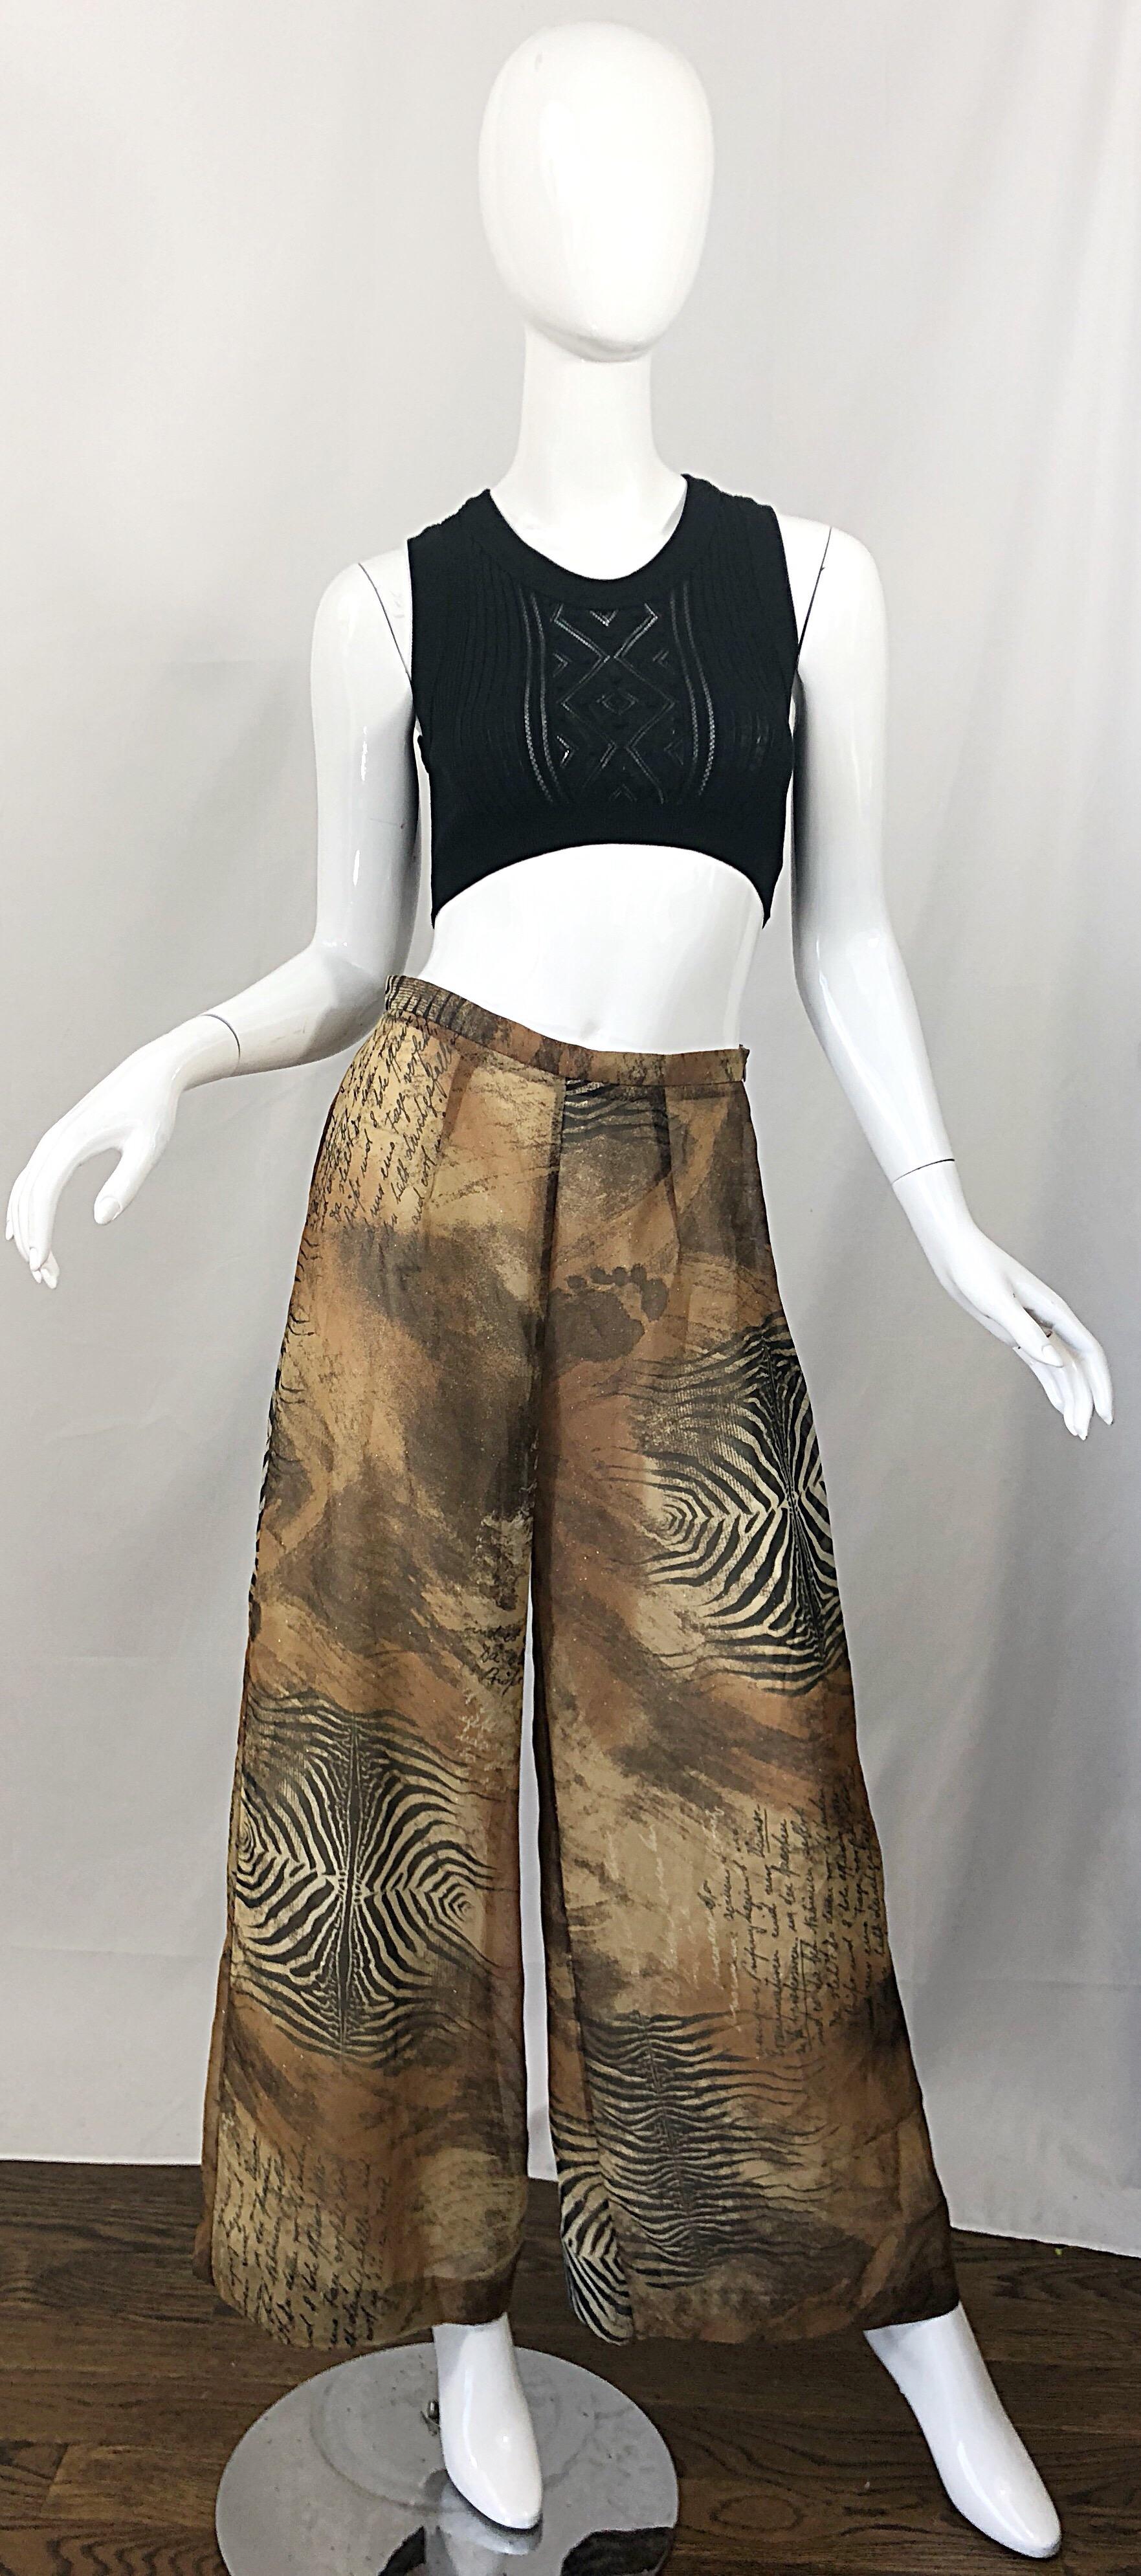 Amazing 1990s 'Footprints in the Sand' wide leg chiffon palazzo  pants! Features printed footprints, poetry, and animal zebra throughout. Neutral colors of tan, brown, brown and black throughout. Light metallic threading throughout (hard to photo).